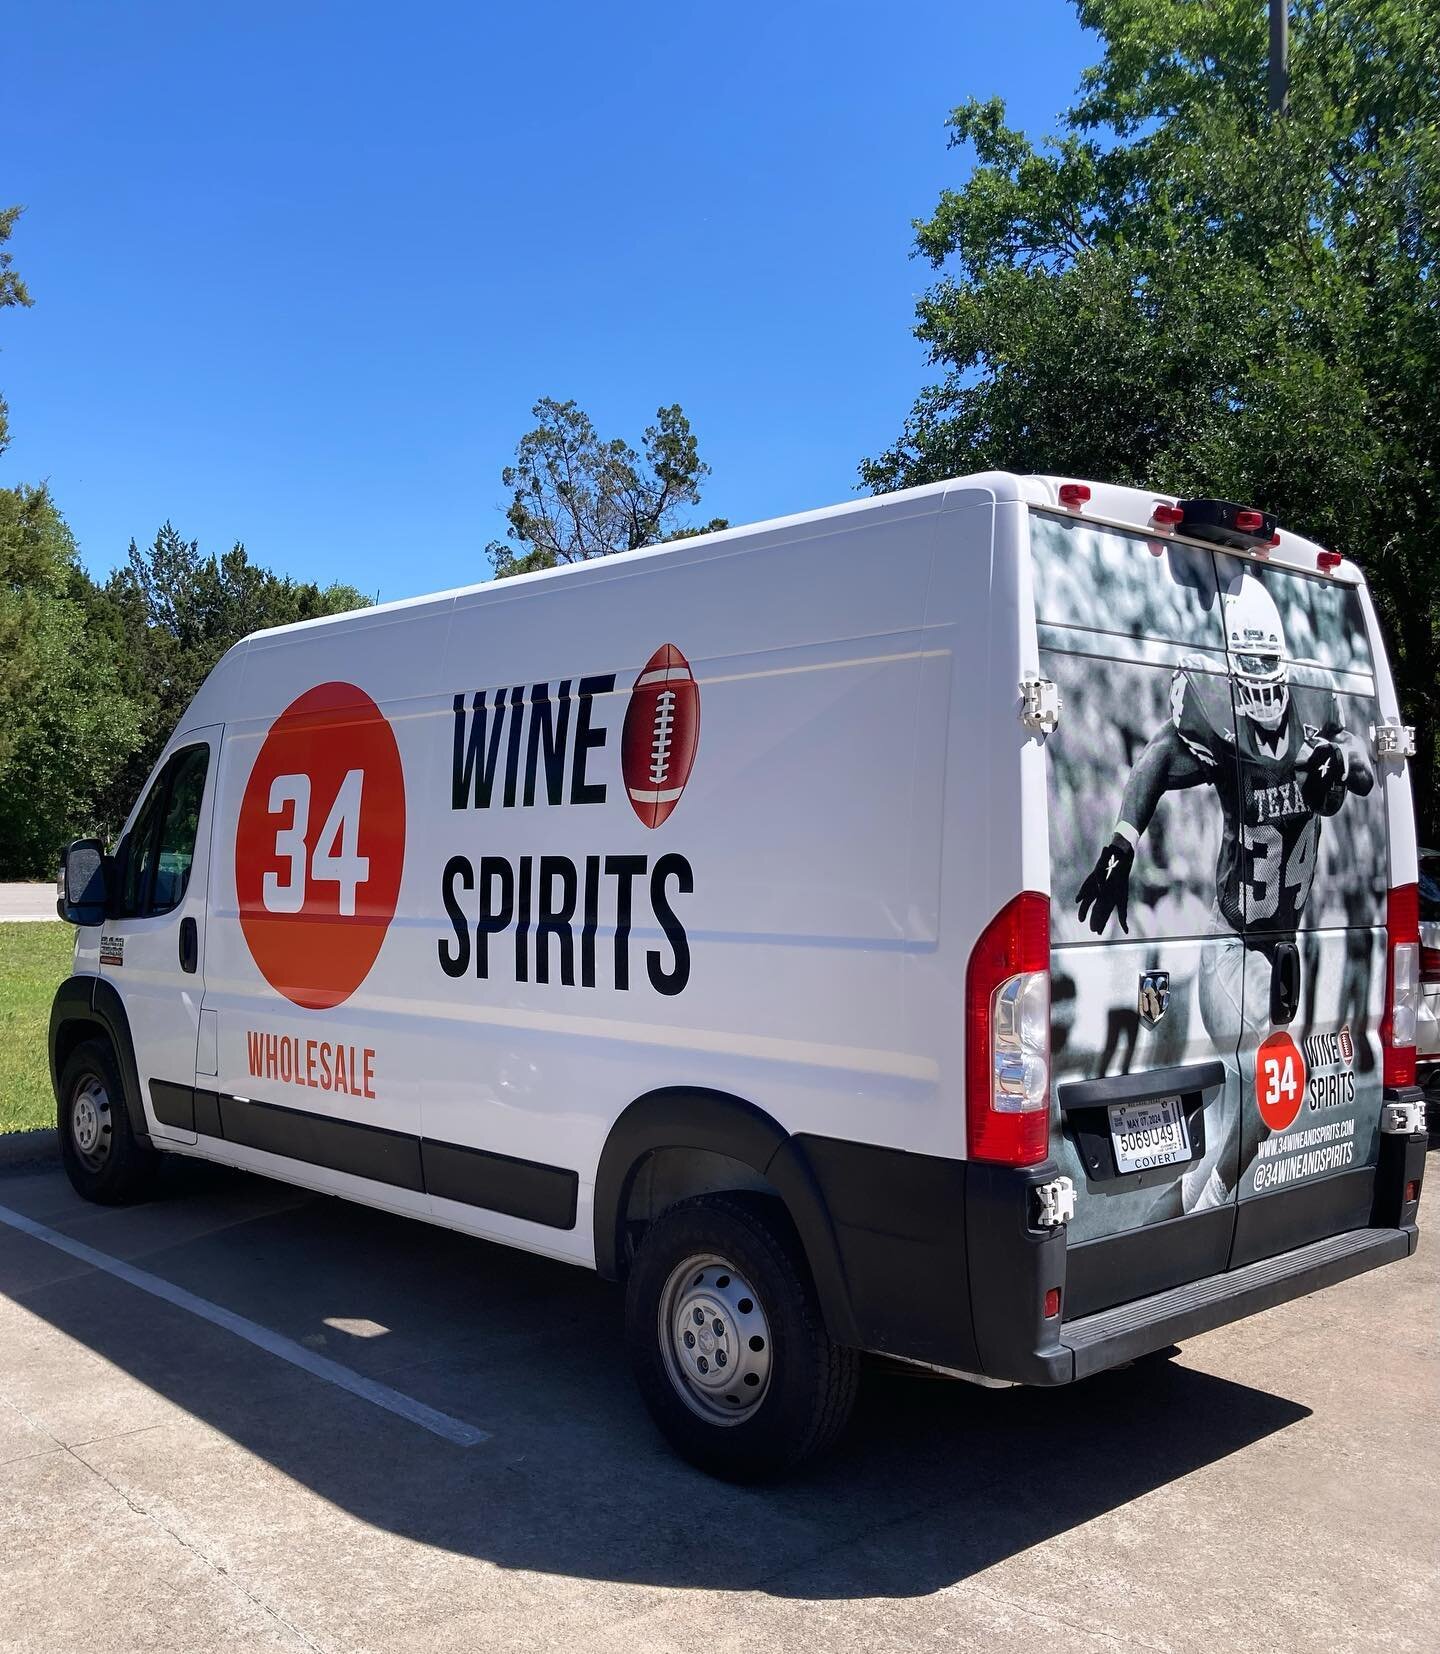 Our van is complete. The @williams van will be all around Austin, Texas delivering beer, wine and spirits to your favorite bar, restaurant, wedding, and party. 
-
-
-
-
- #austin #texas #atx #liquor #liquordelivery #delivery #liquorstore #wholesale #